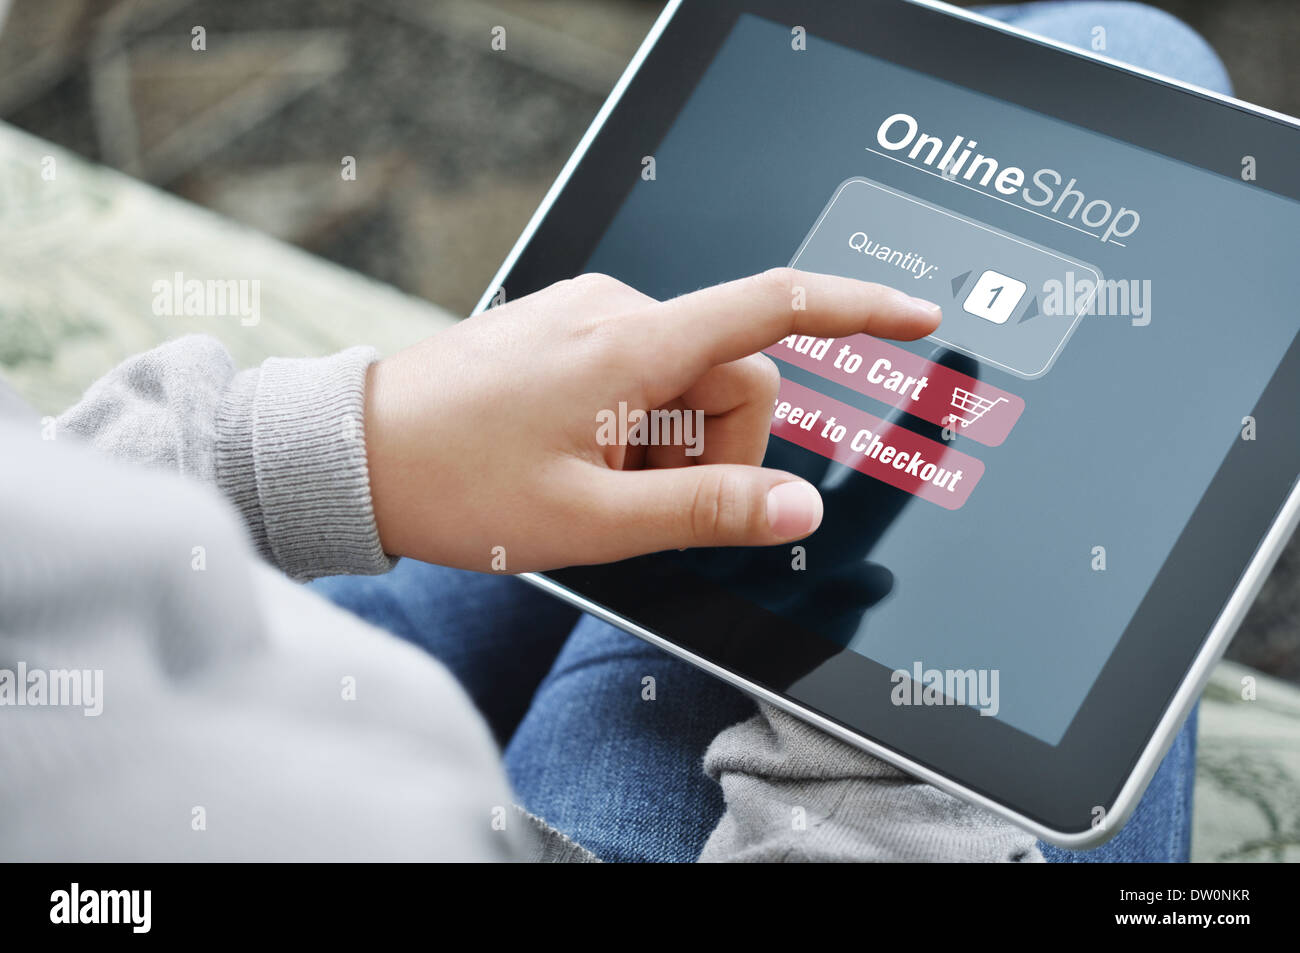 Young woman using touch screen device for online shopping Stock Photo